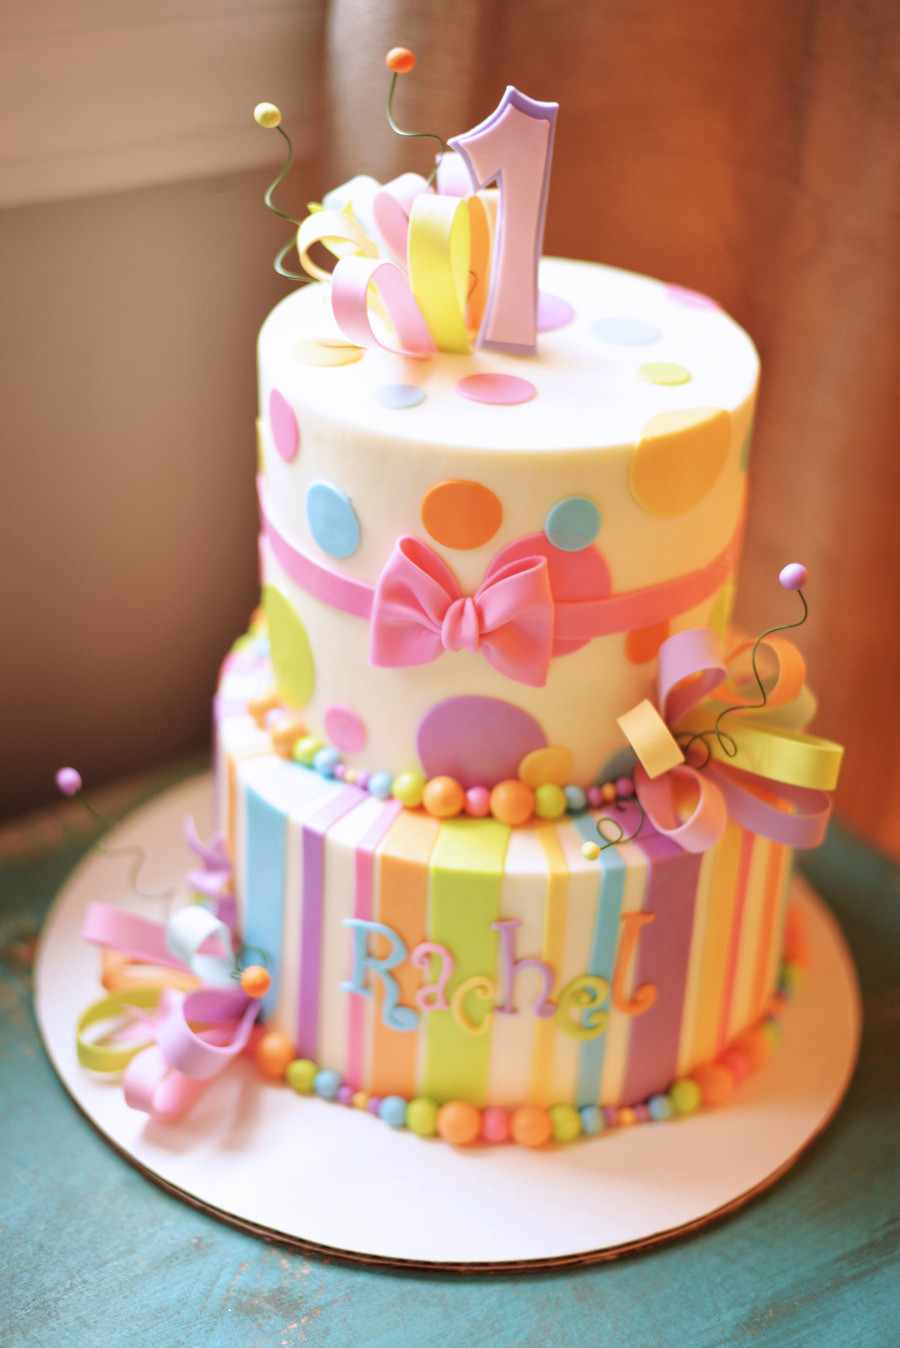 Cute Birthday Cakes
 Girly Whimsical 1St Birthday Cake CakeCentral